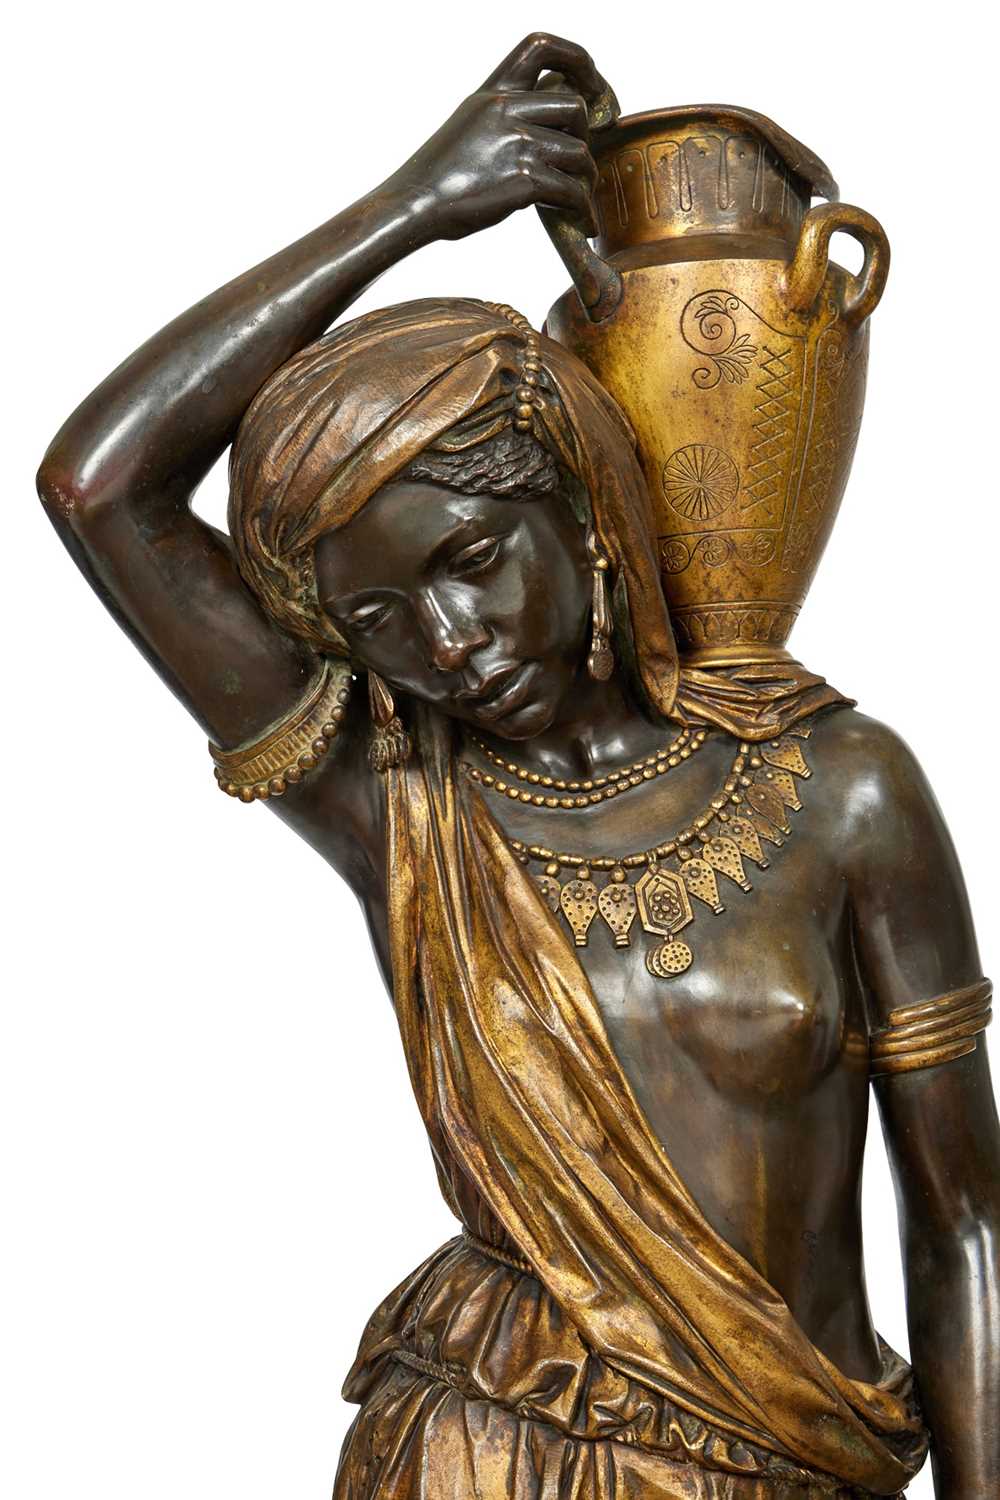 GRAUX-MARLY, PARIS: A 19TH CENTURY LIFE-SIZE ORIENTALIST BRONZE OF A NUBIAN WATER CARRIER - Image 2 of 5